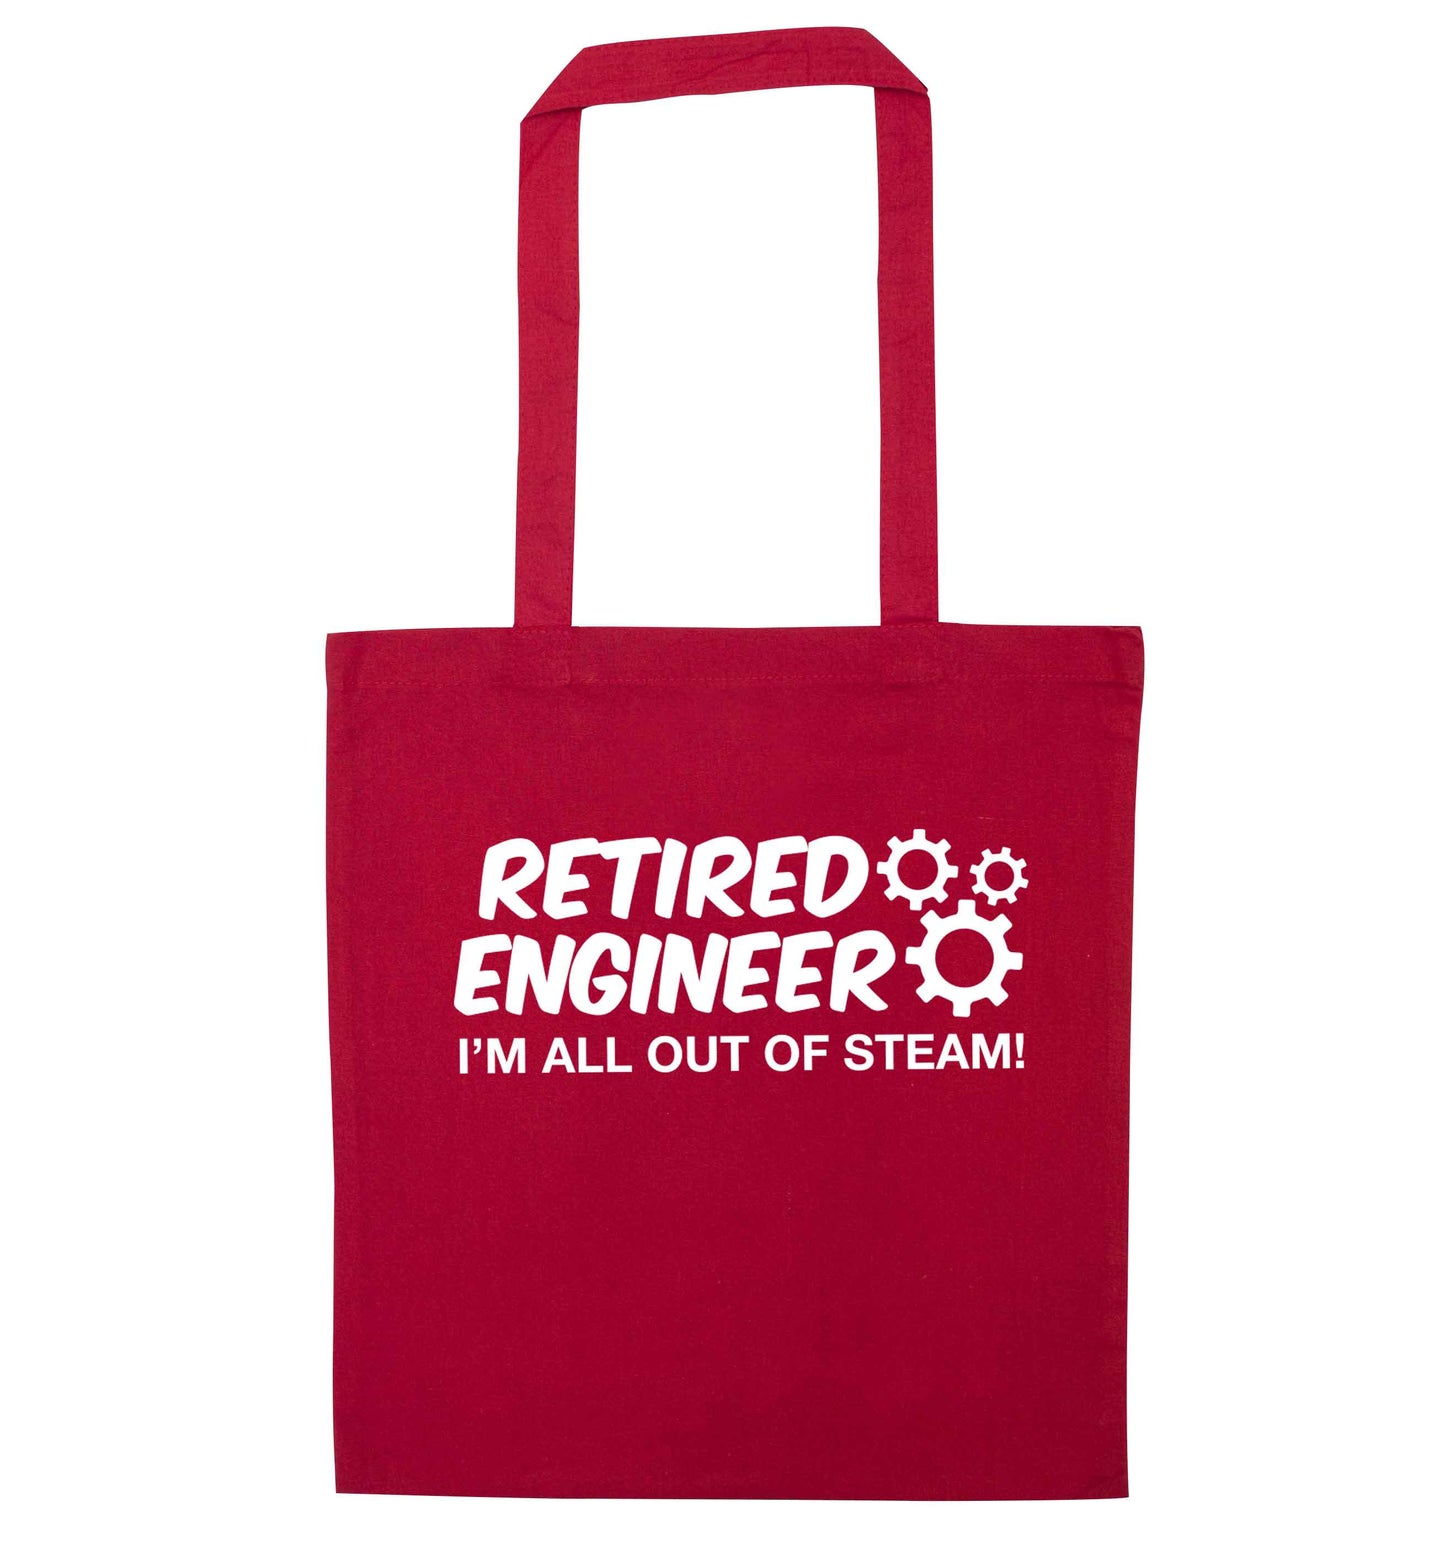 Retired engineer I'm all out of steam red tote bag